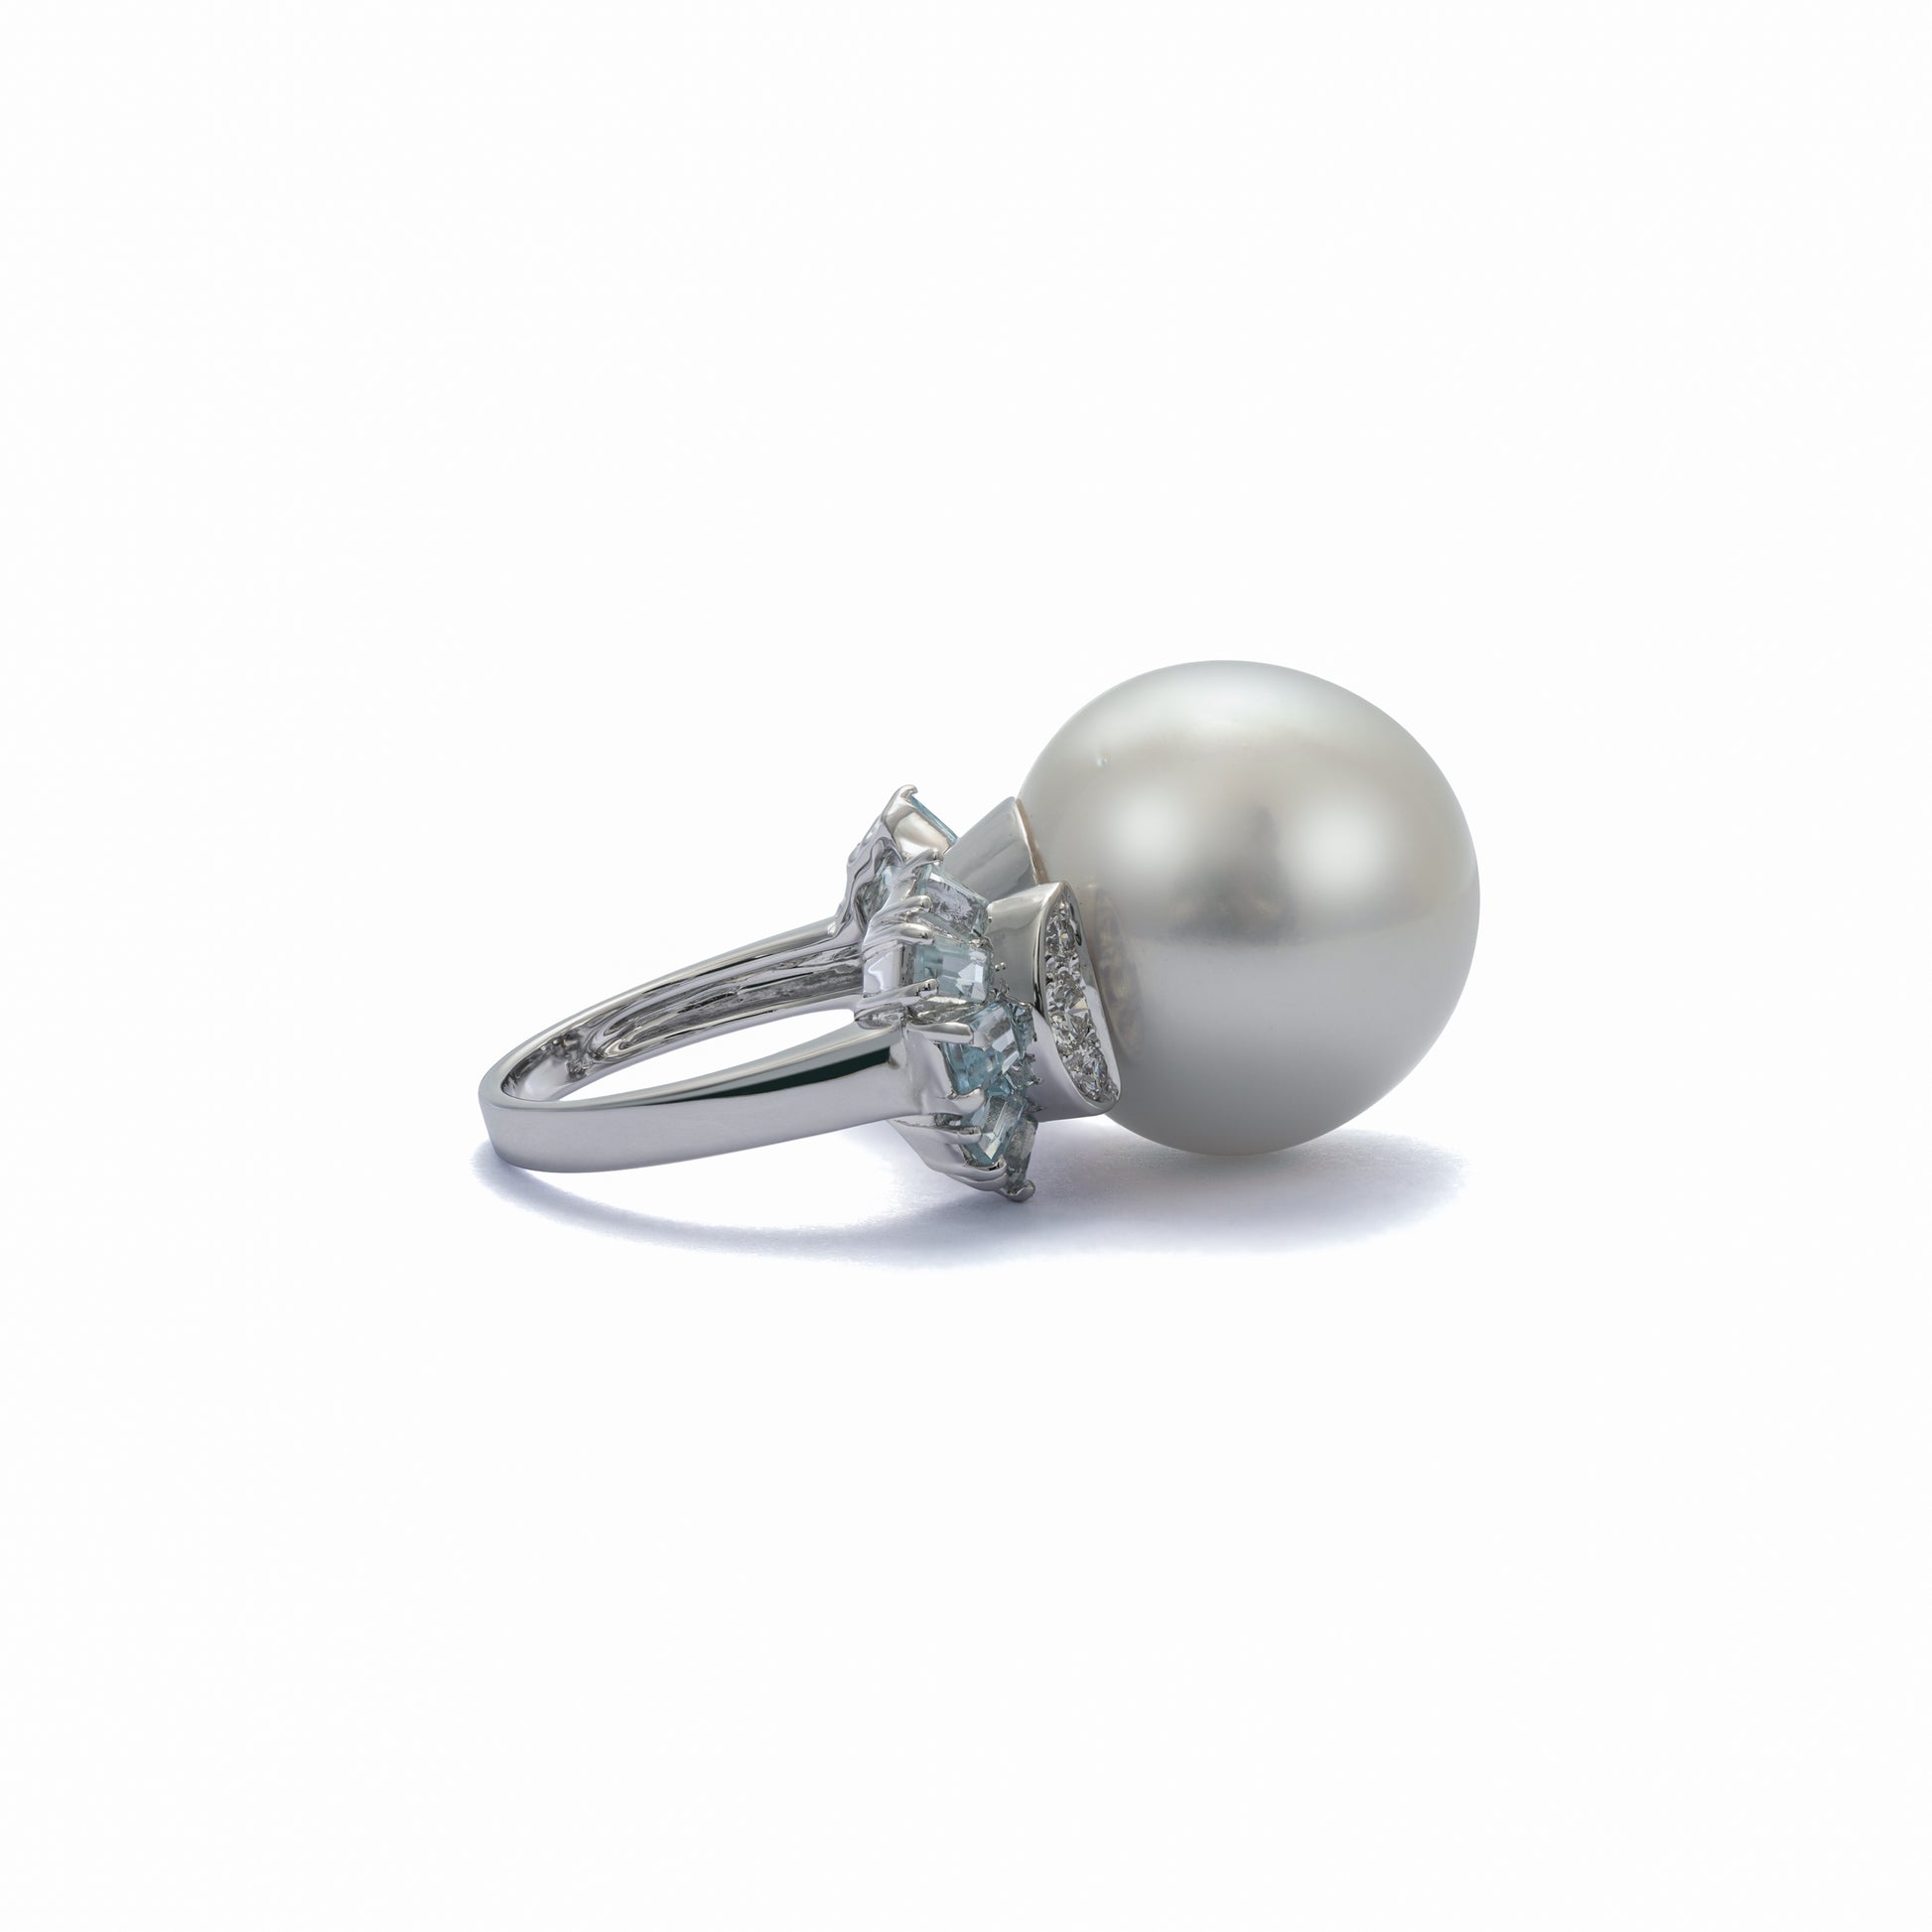 South Sea Pearl With White Diamond & Aquamarine Ring - K.S. Sze & Sons